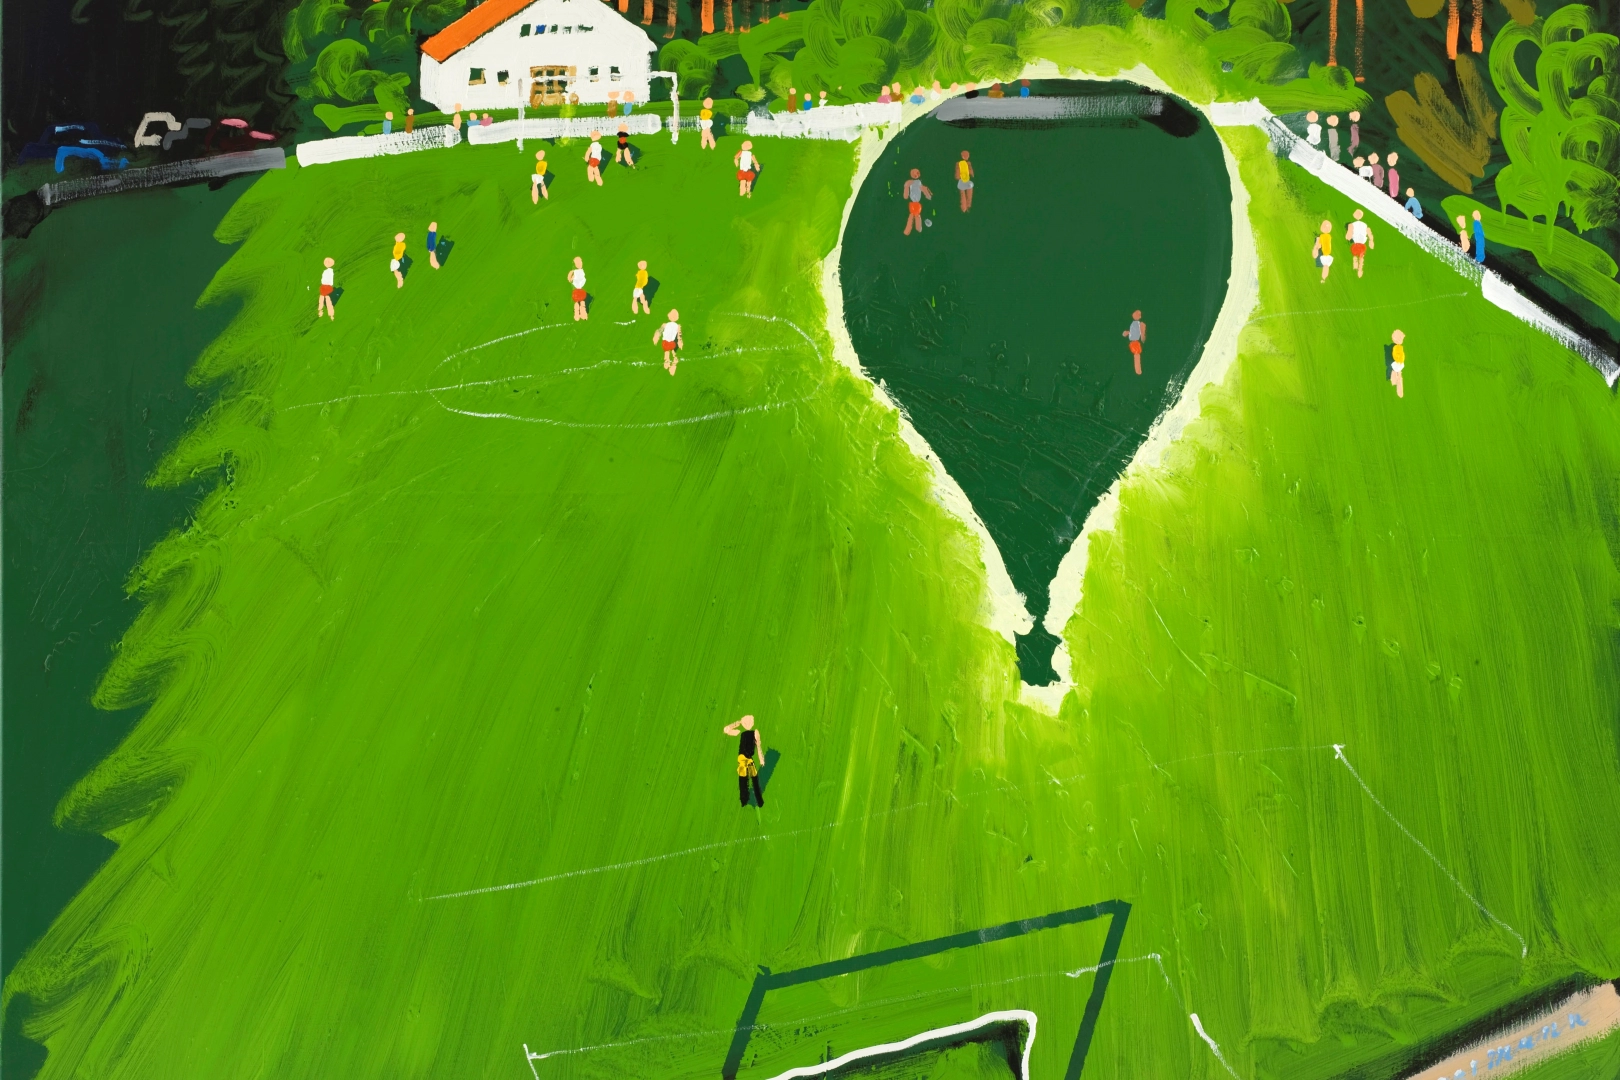 Soccer in the gallery. Exhibition in Cheb explores the depiction of football in Czech visual art